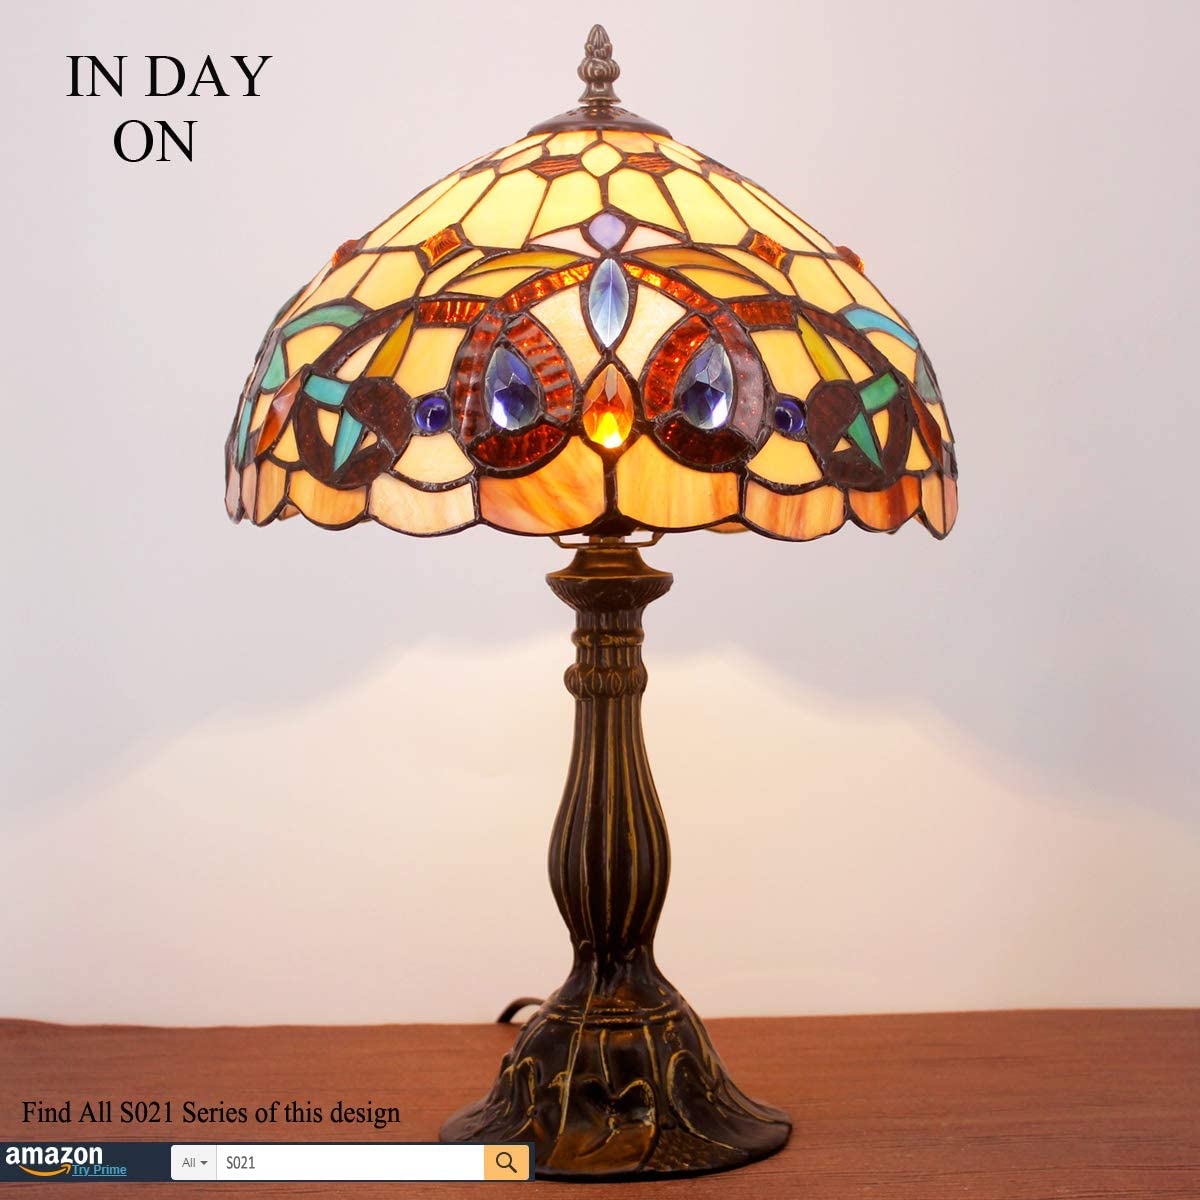 SHADY  Style Table Lamp Stained Glass Serenity Victorian Bedside Lamp Desk Reading Light 12X12X18 Inches Decor Bedroom Living Room Home Office S021 Series